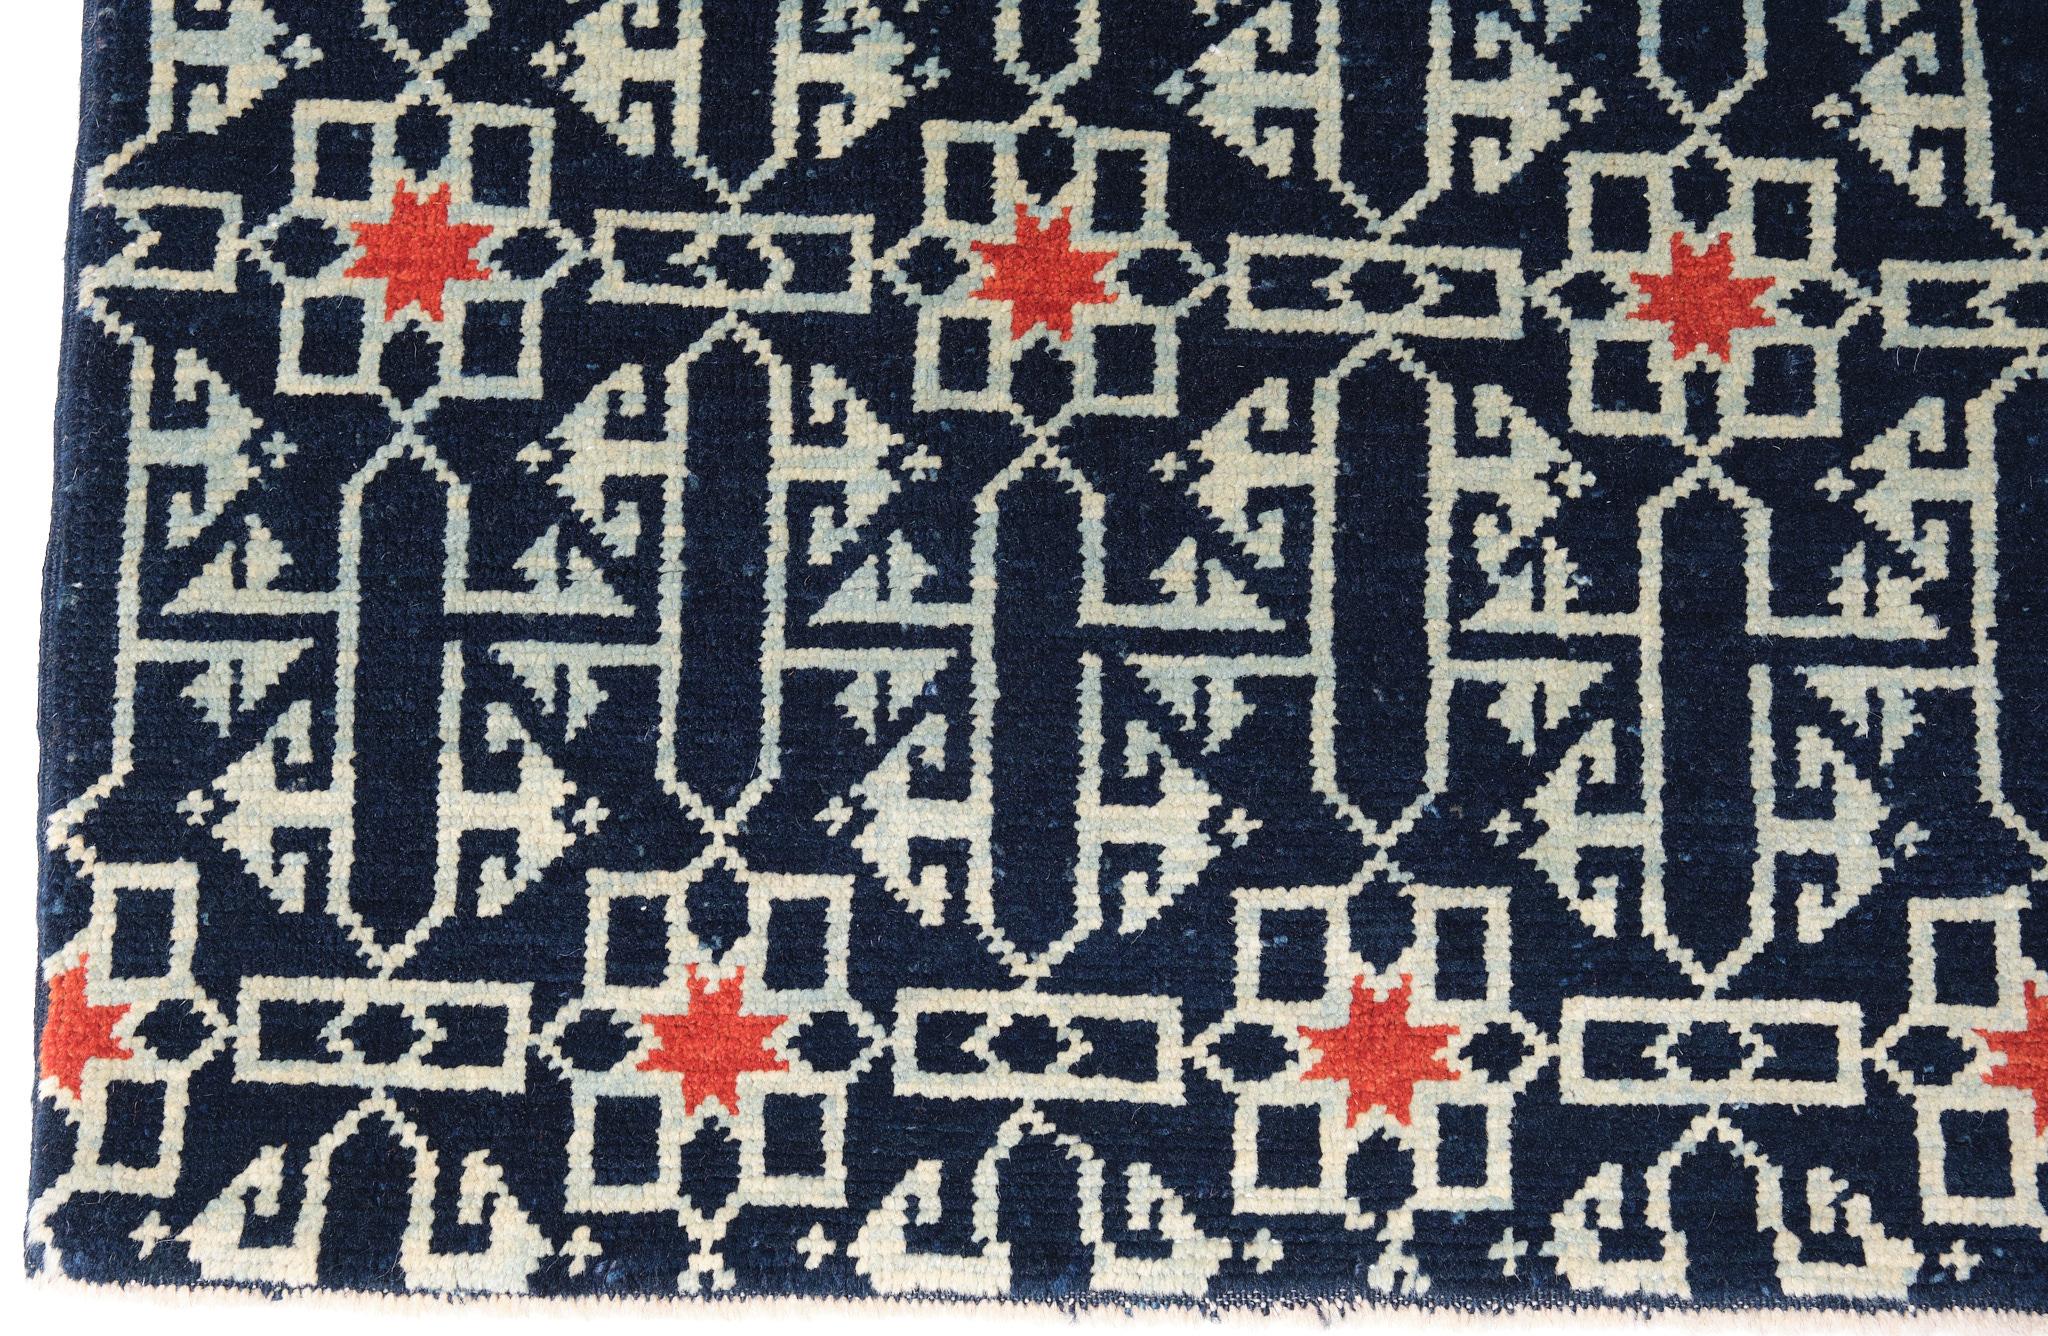 The source of the carpet comes from the book Orient Stars Collection, Anatolian Tribal Rugs 1050-1750, Michael Franses, Hali Publications Ltd, 2021 fig.23. This 13th-century carpet is from probably the Konya region, central Anatolia, circa 1200-1300